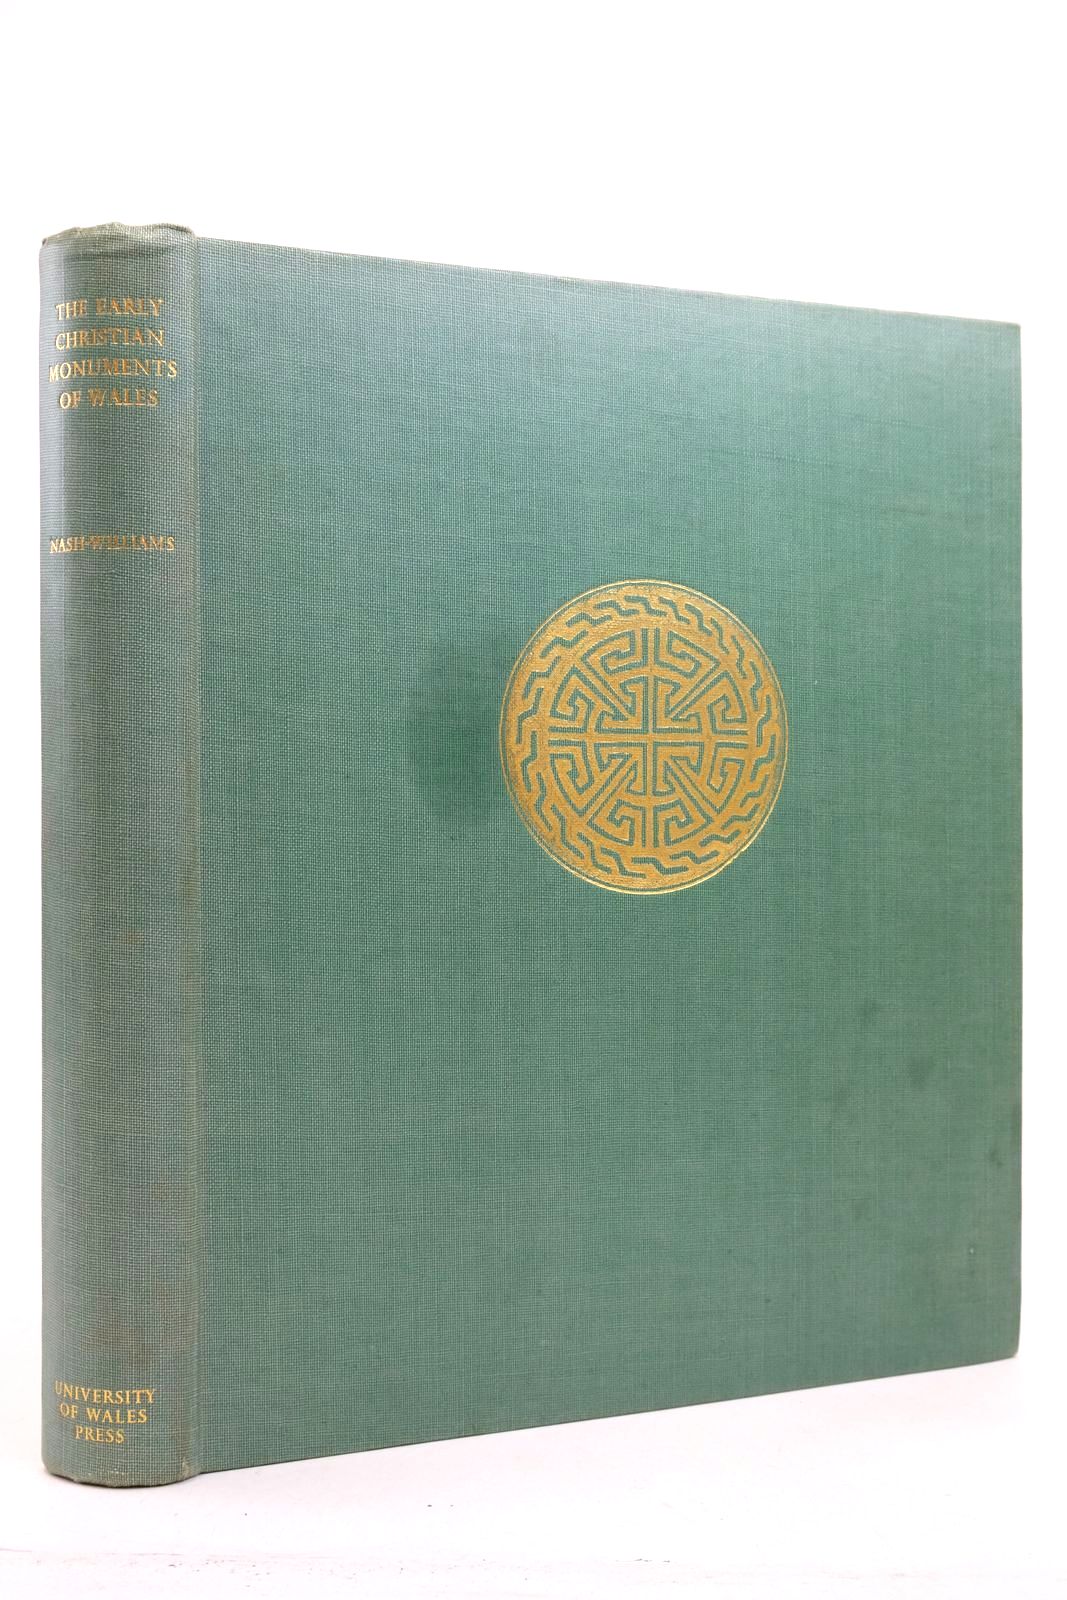 Photo of THE EARLY CHRISTIAN MONUMENTS OF WALES written by Nash-Williams, V.E. published by Cardiff University Of Wales Press (STOCK CODE: 2140756)  for sale by Stella & Rose's Books